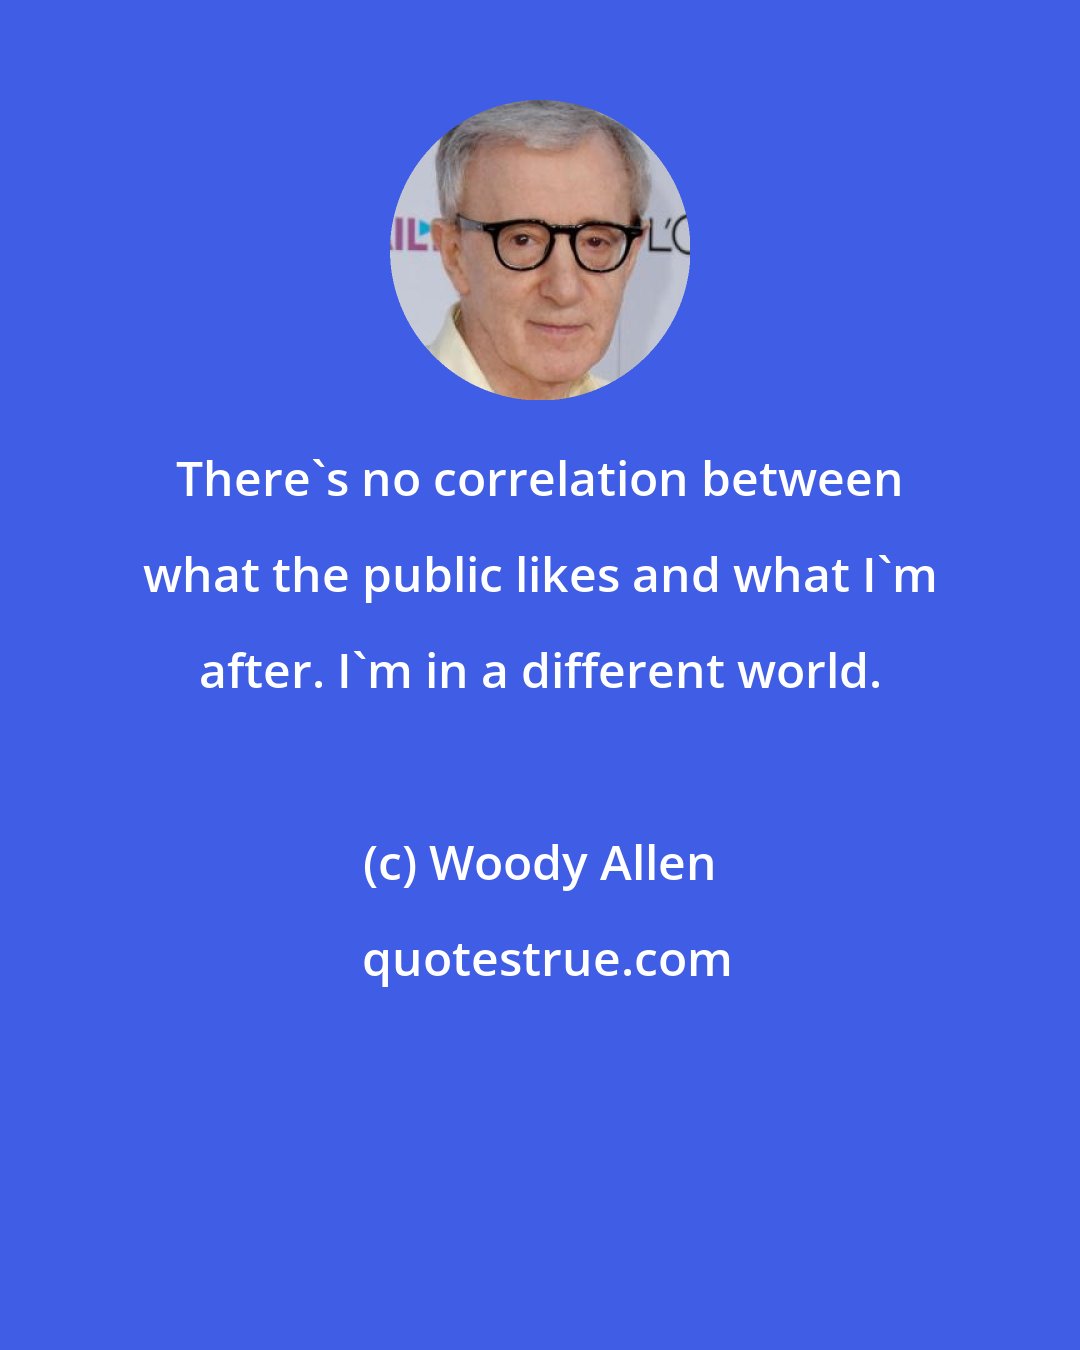 Woody Allen: There's no correlation between what the public likes and what I'm after. I'm in a different world.